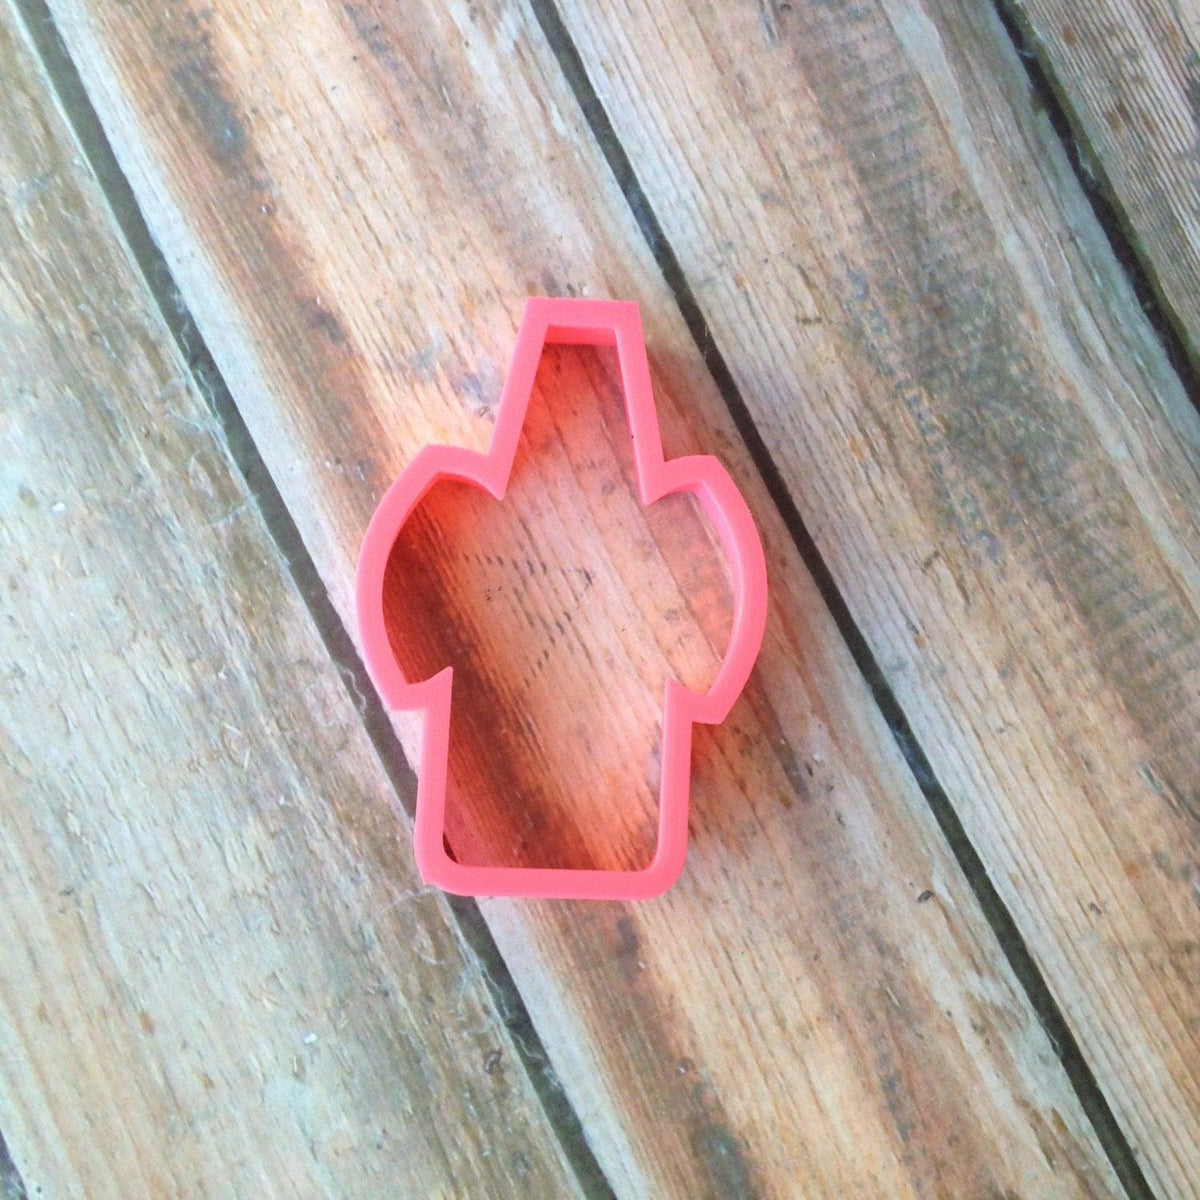 Nail Polish Bottle Cookie Cutter - Sweetleigh 